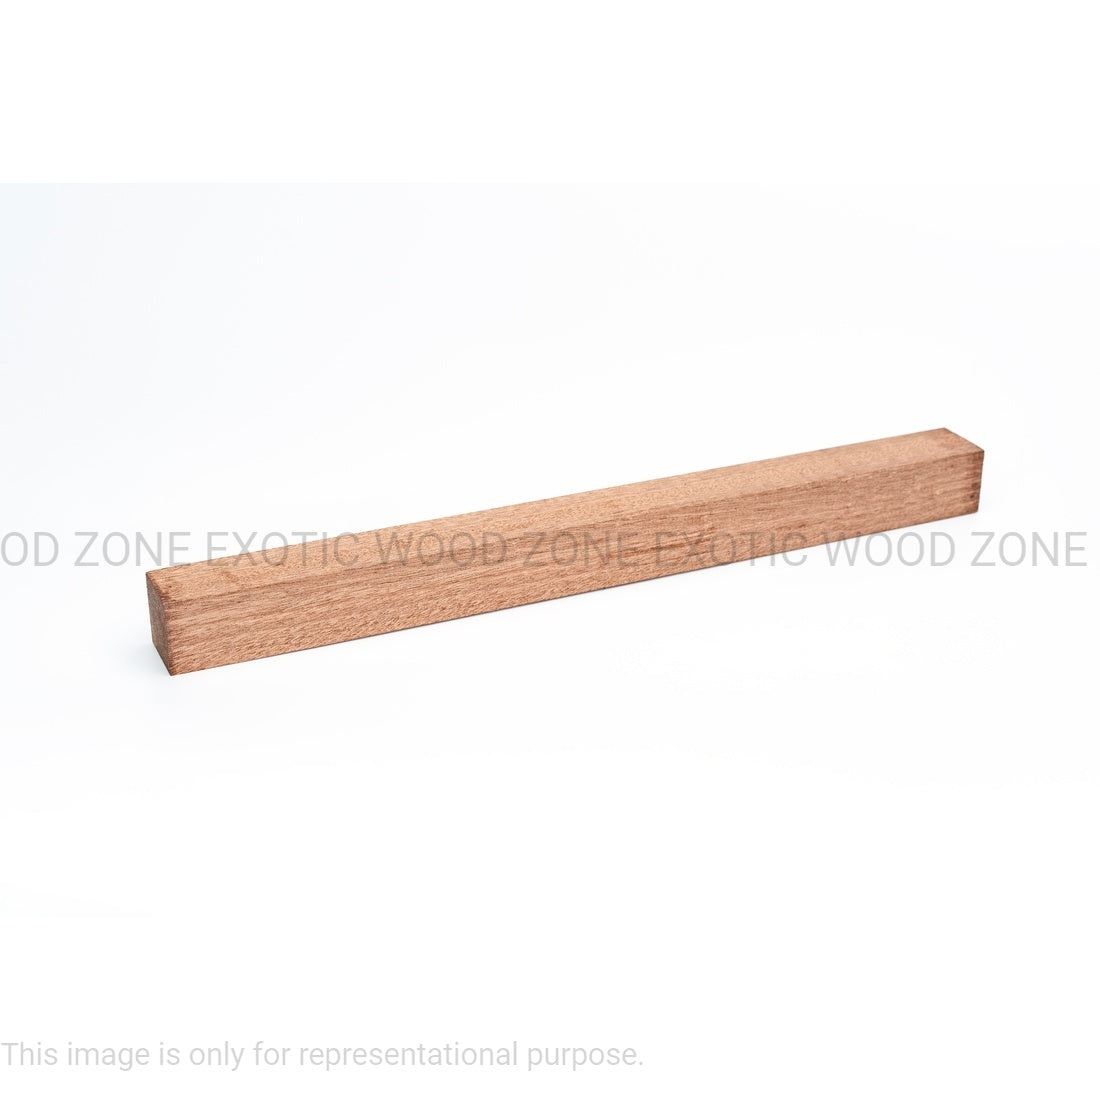 Sapele Hobbywood Blank 1&quot; x 1 &quot; x 12&quot; inches Exotic Wood Zone